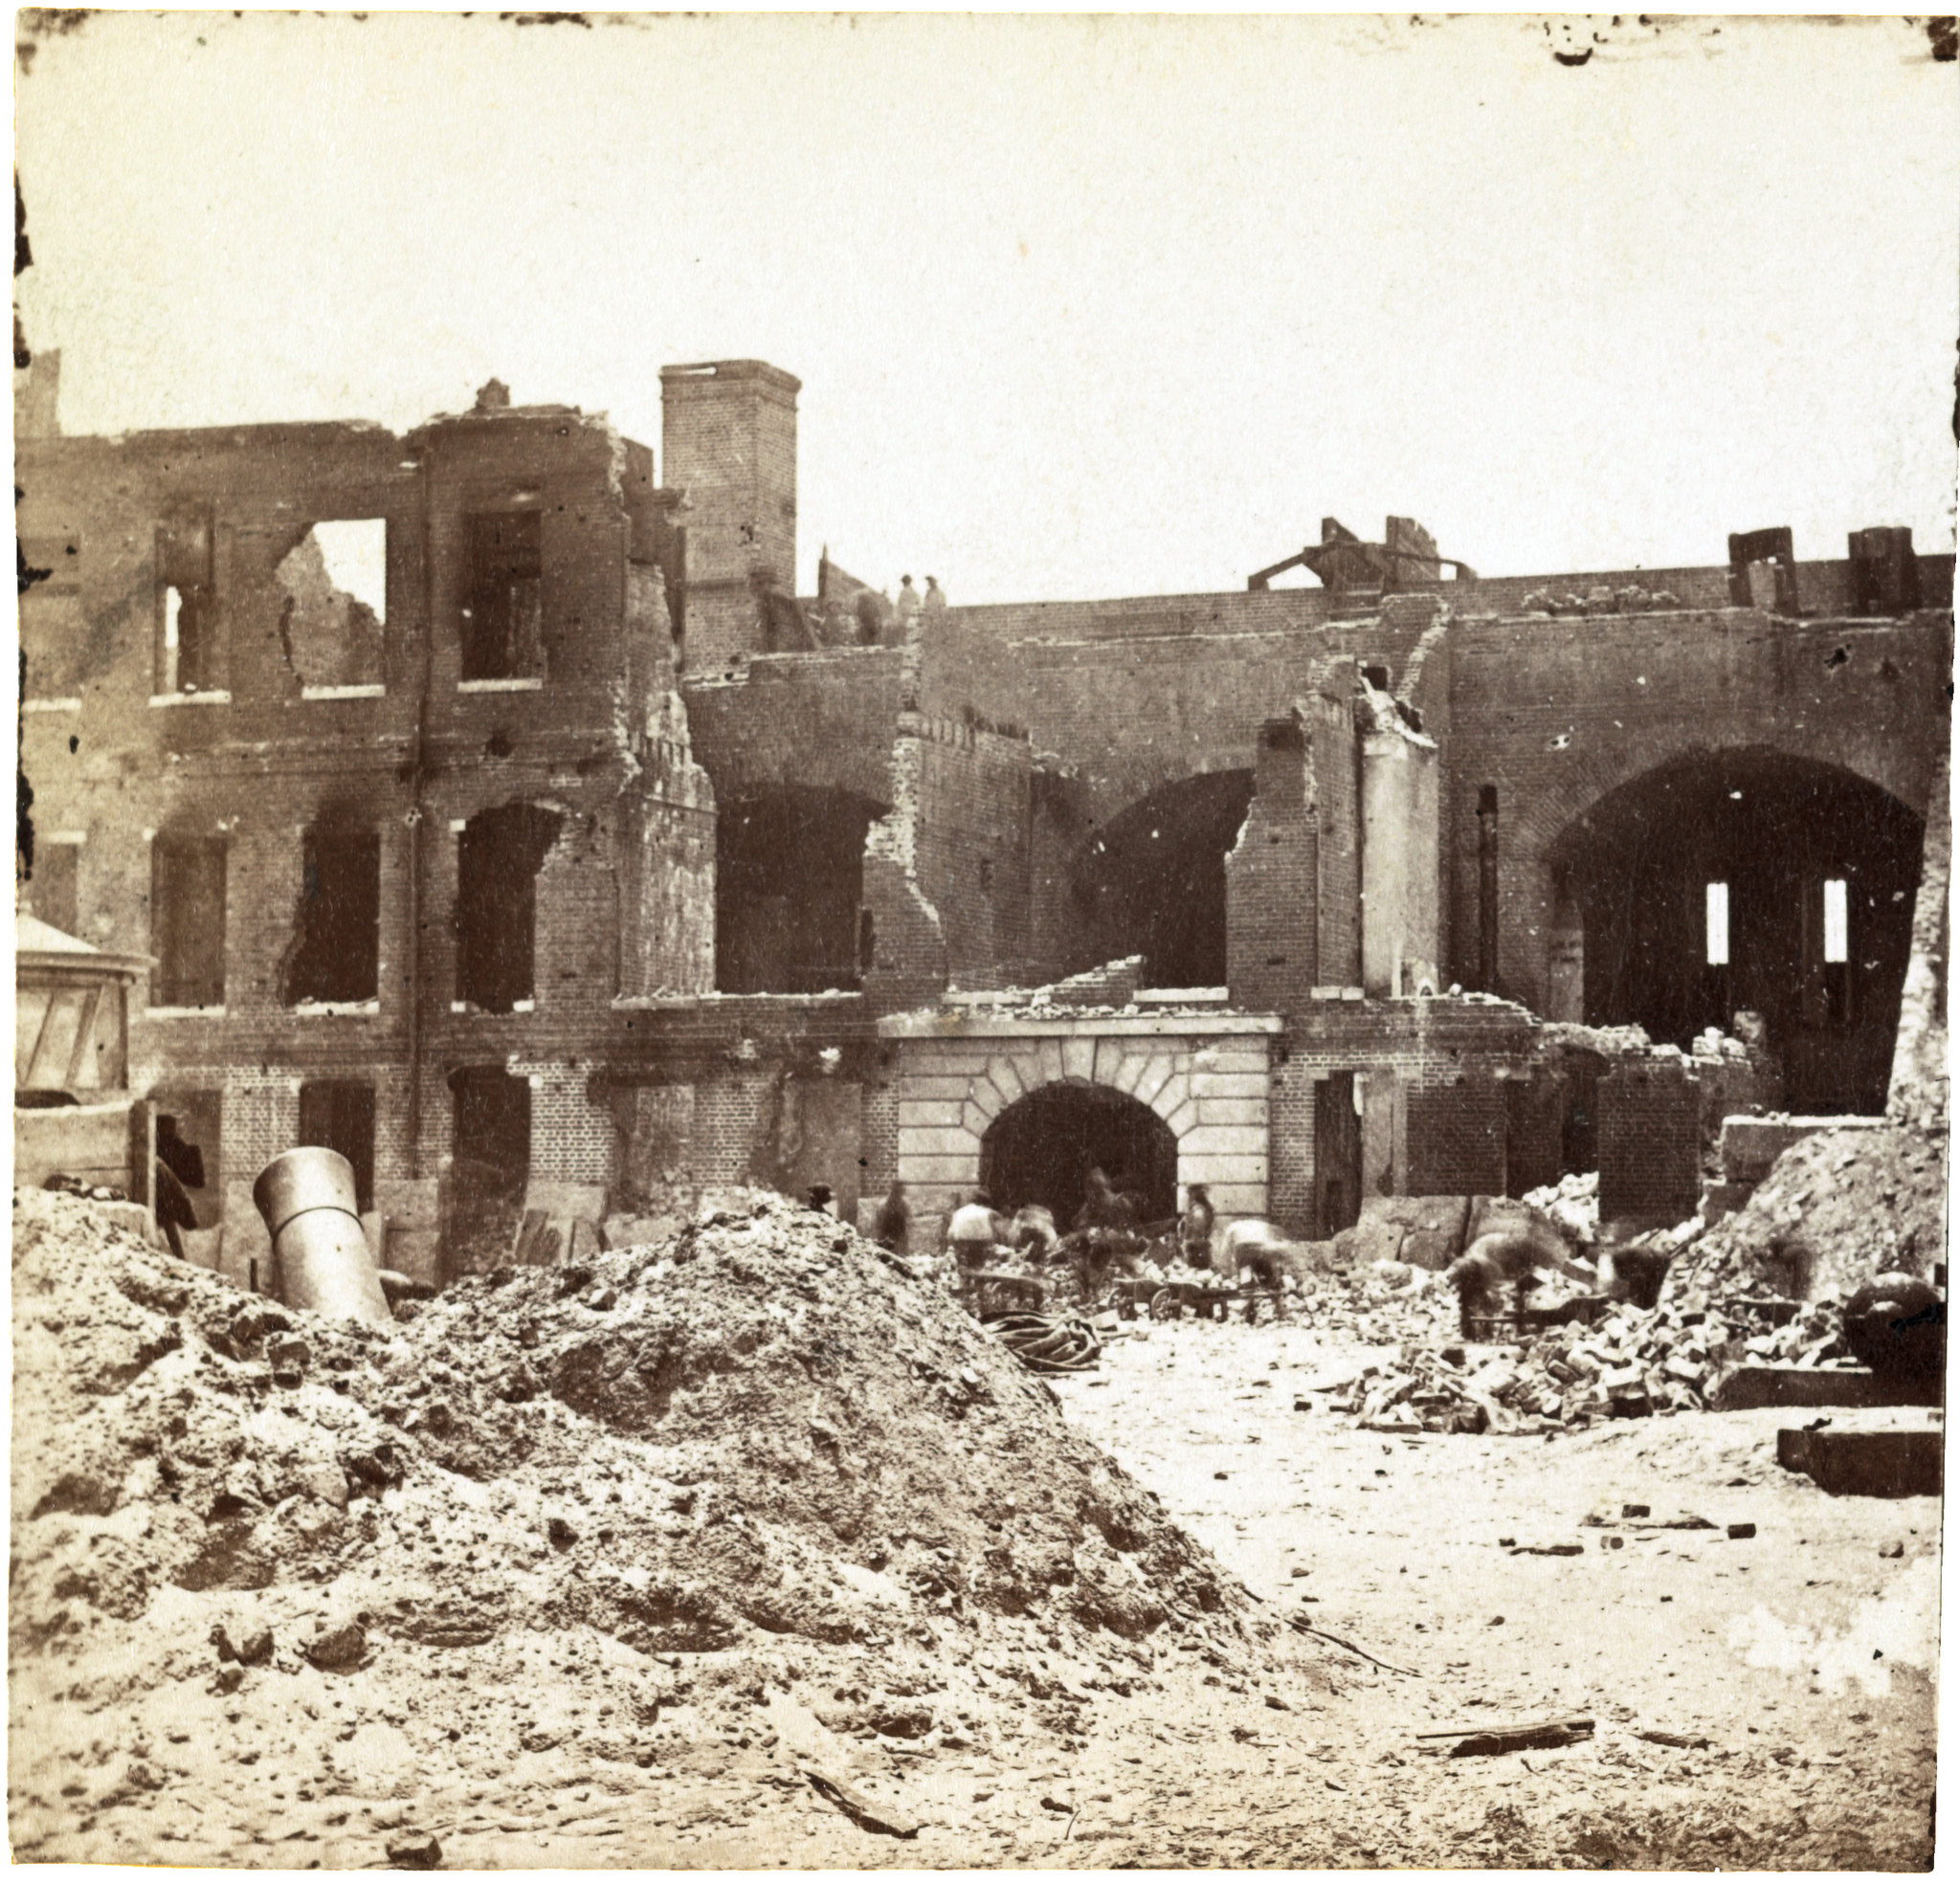 Interior Sumter the day after Gen. Anderson left, April 1861